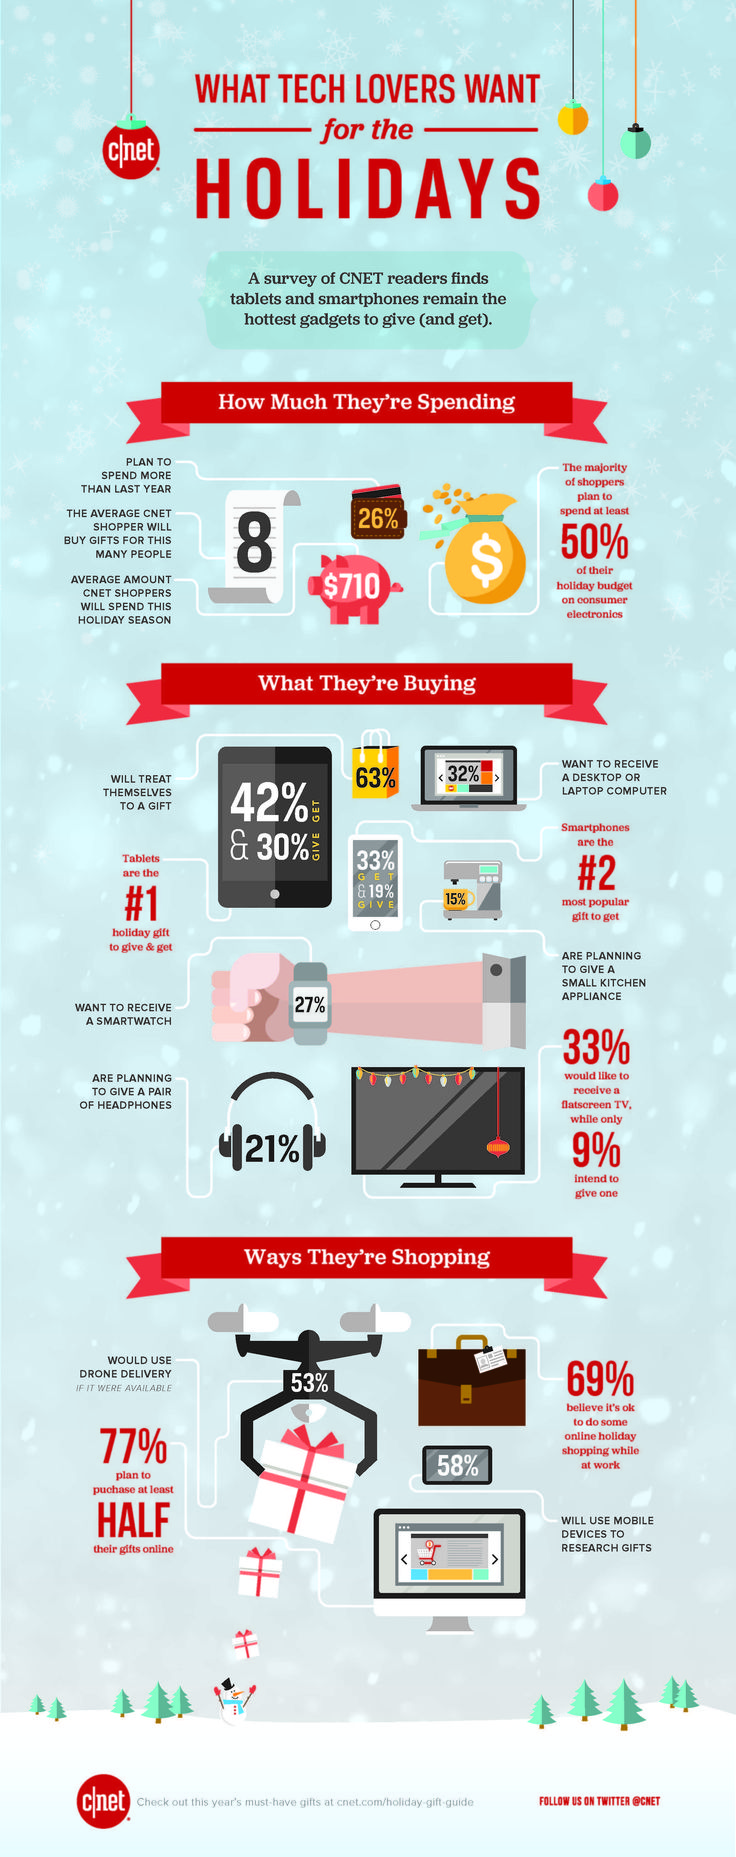 Our annual study shows that holiday shoppers looking for tech deals will spend m...